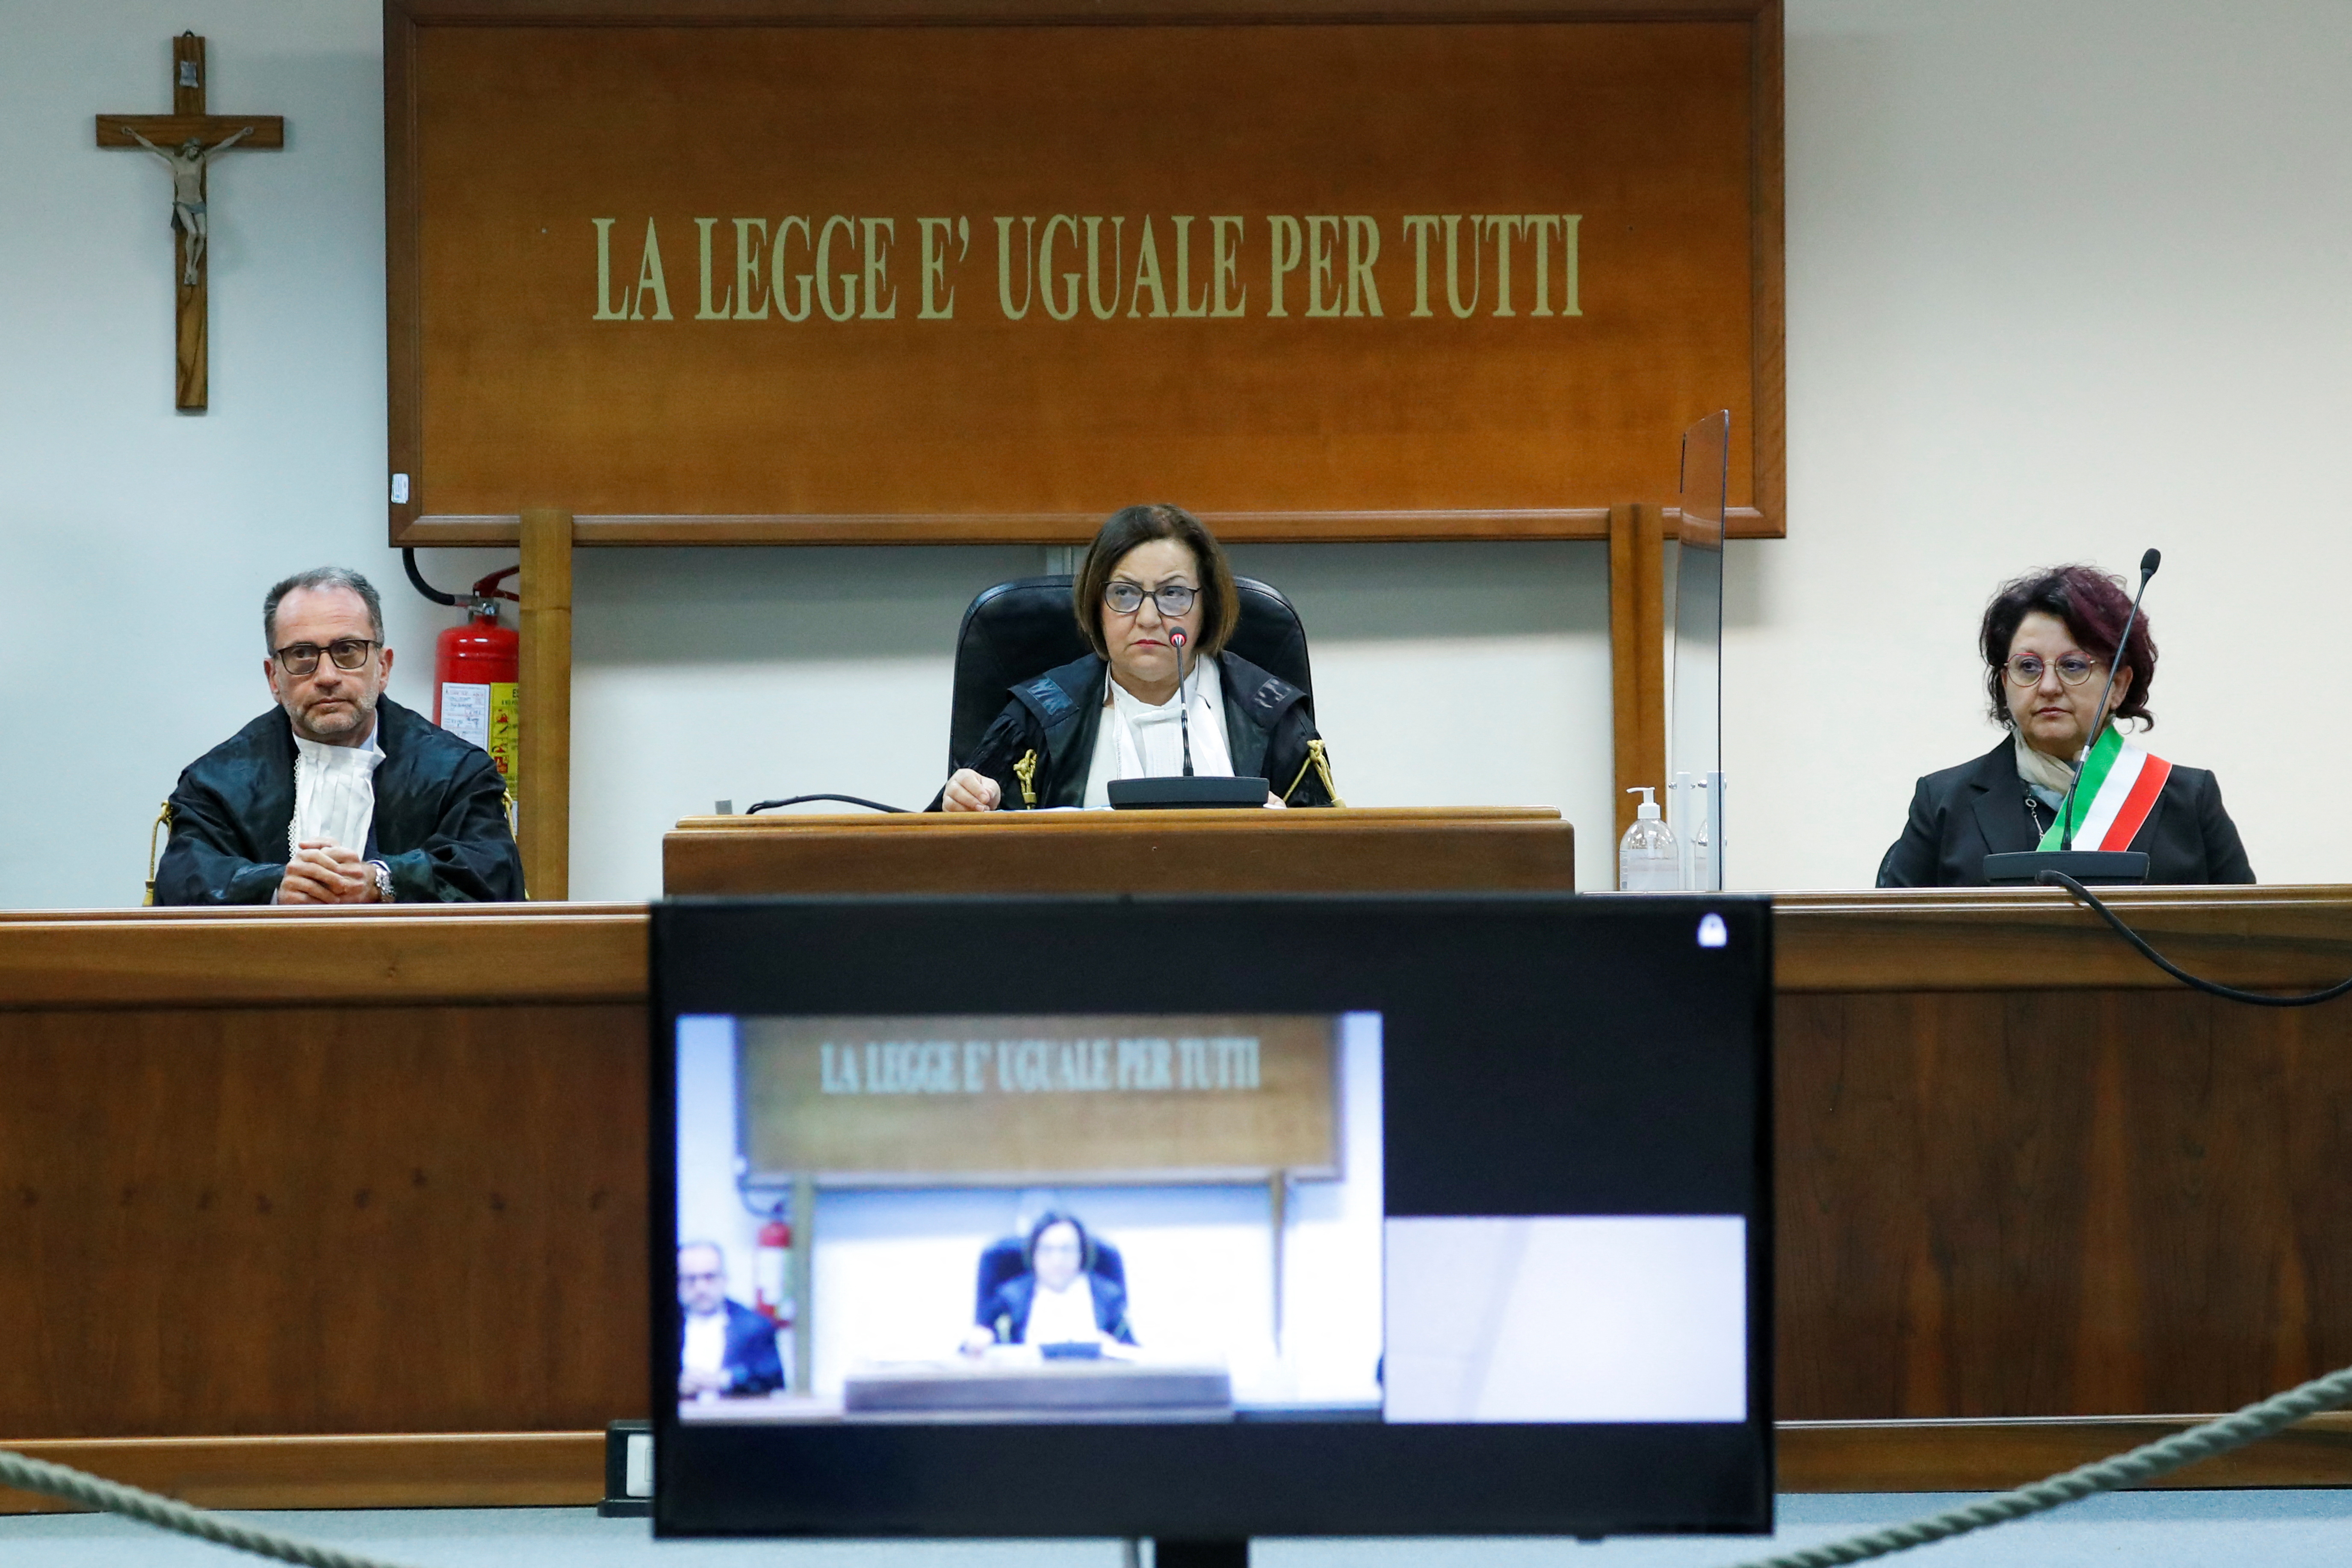 Trial starts for Italy's most wanted mafia boss Matteo Messina Denaro in Caltanissetta